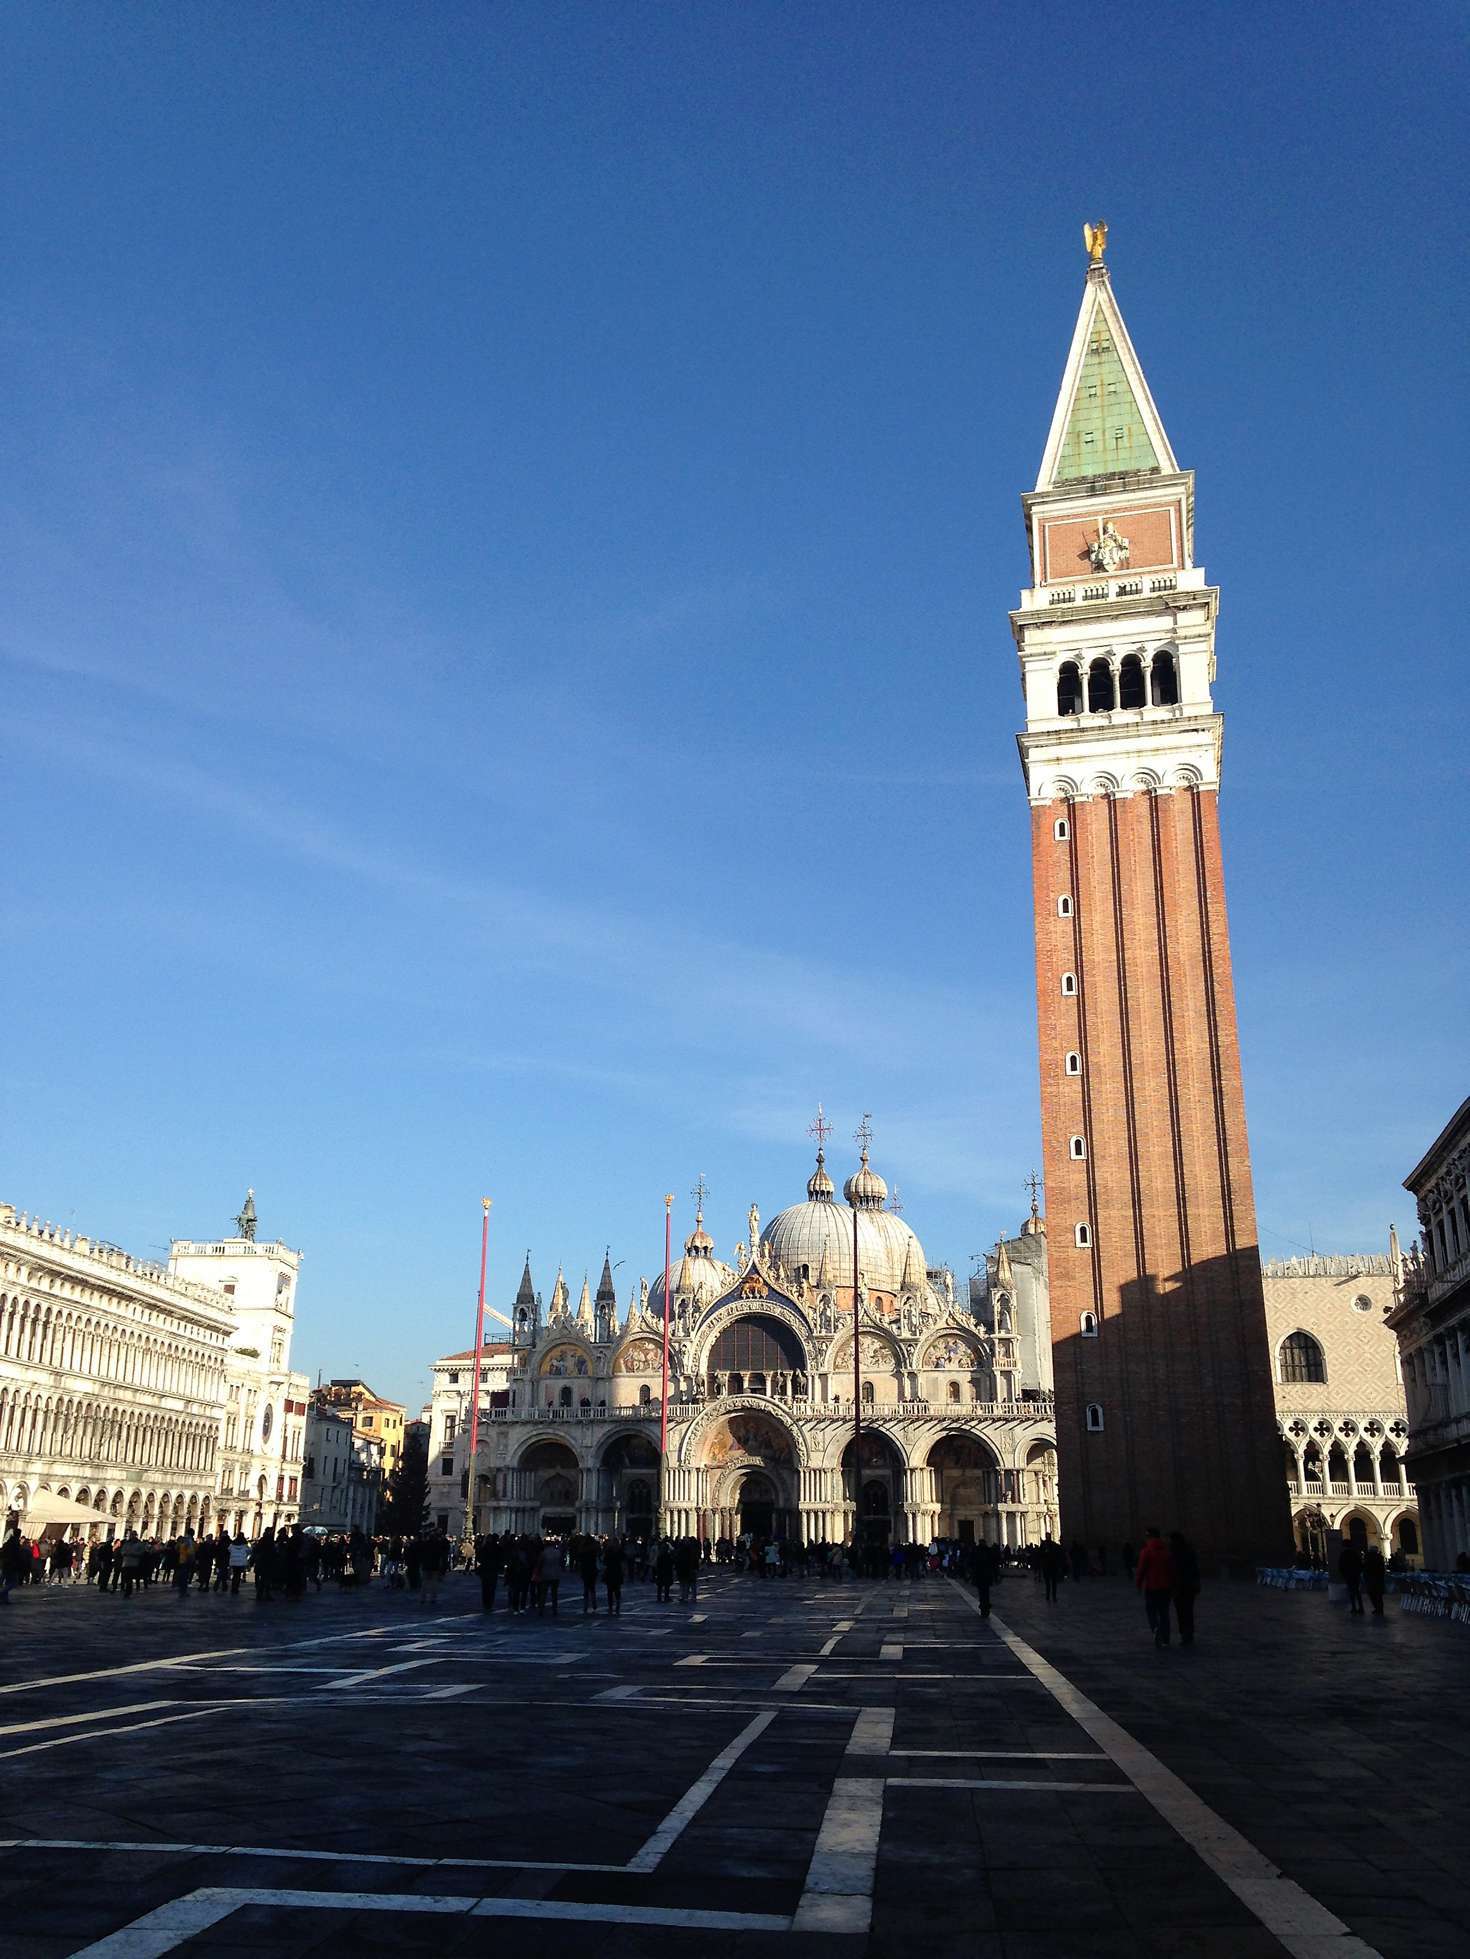 Saint Mark's square with St. Marks's Basilica and a tower in the background.